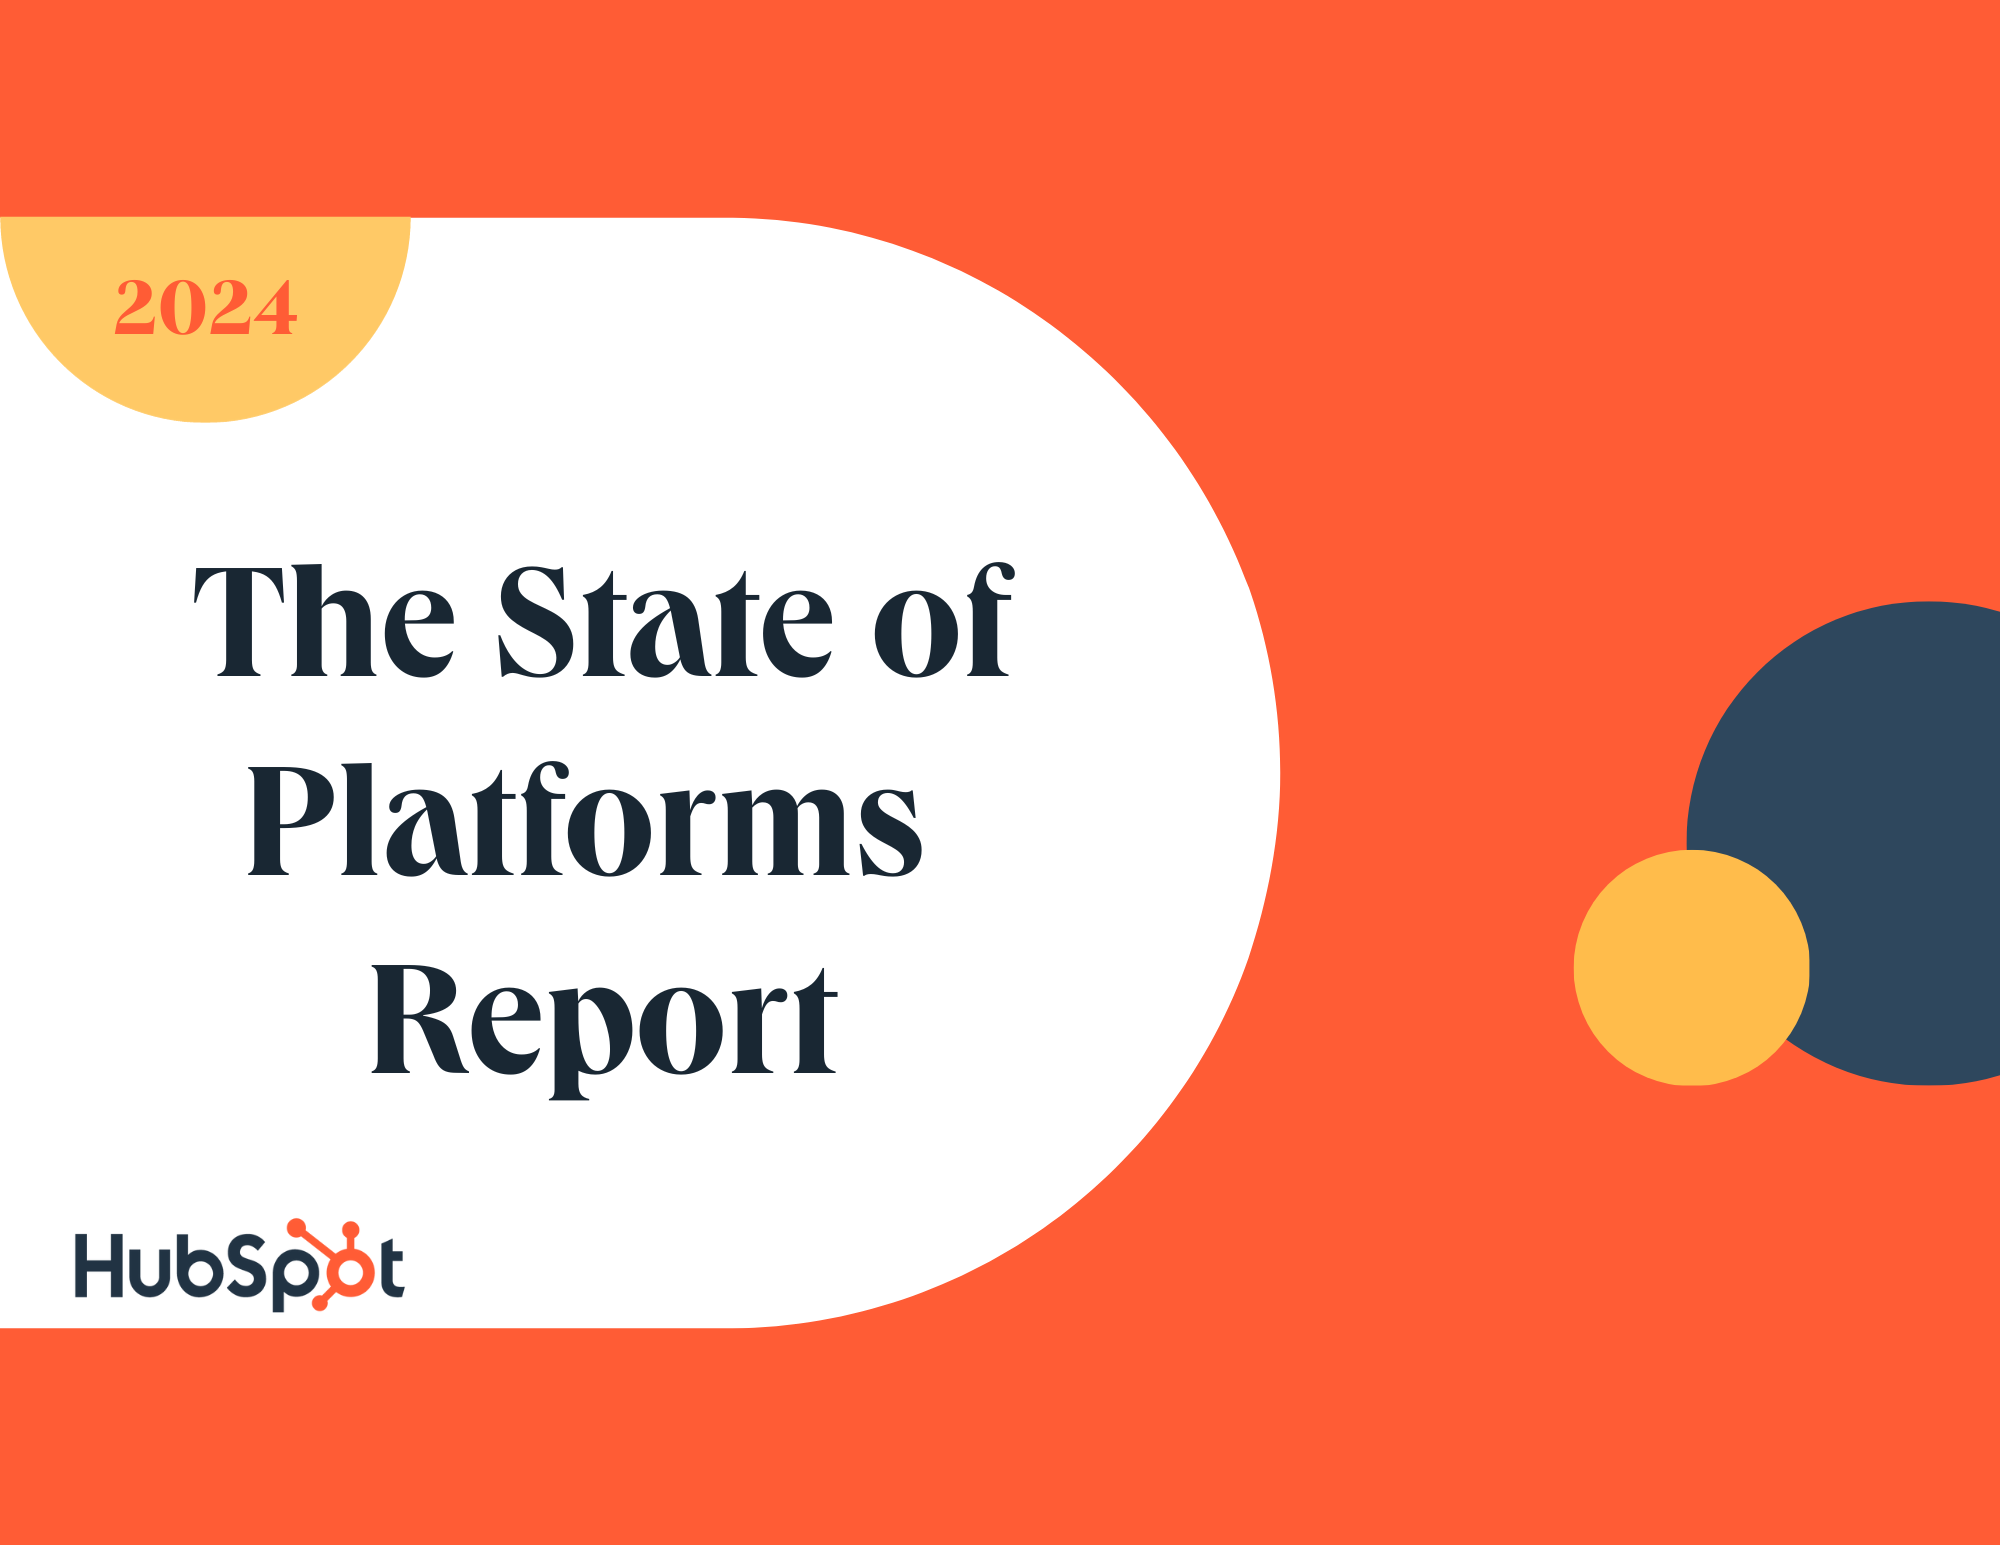 HubSpot Releases The State of Platforms Report, Detailing Platform Ecosystems and How to Leverage them to Grow